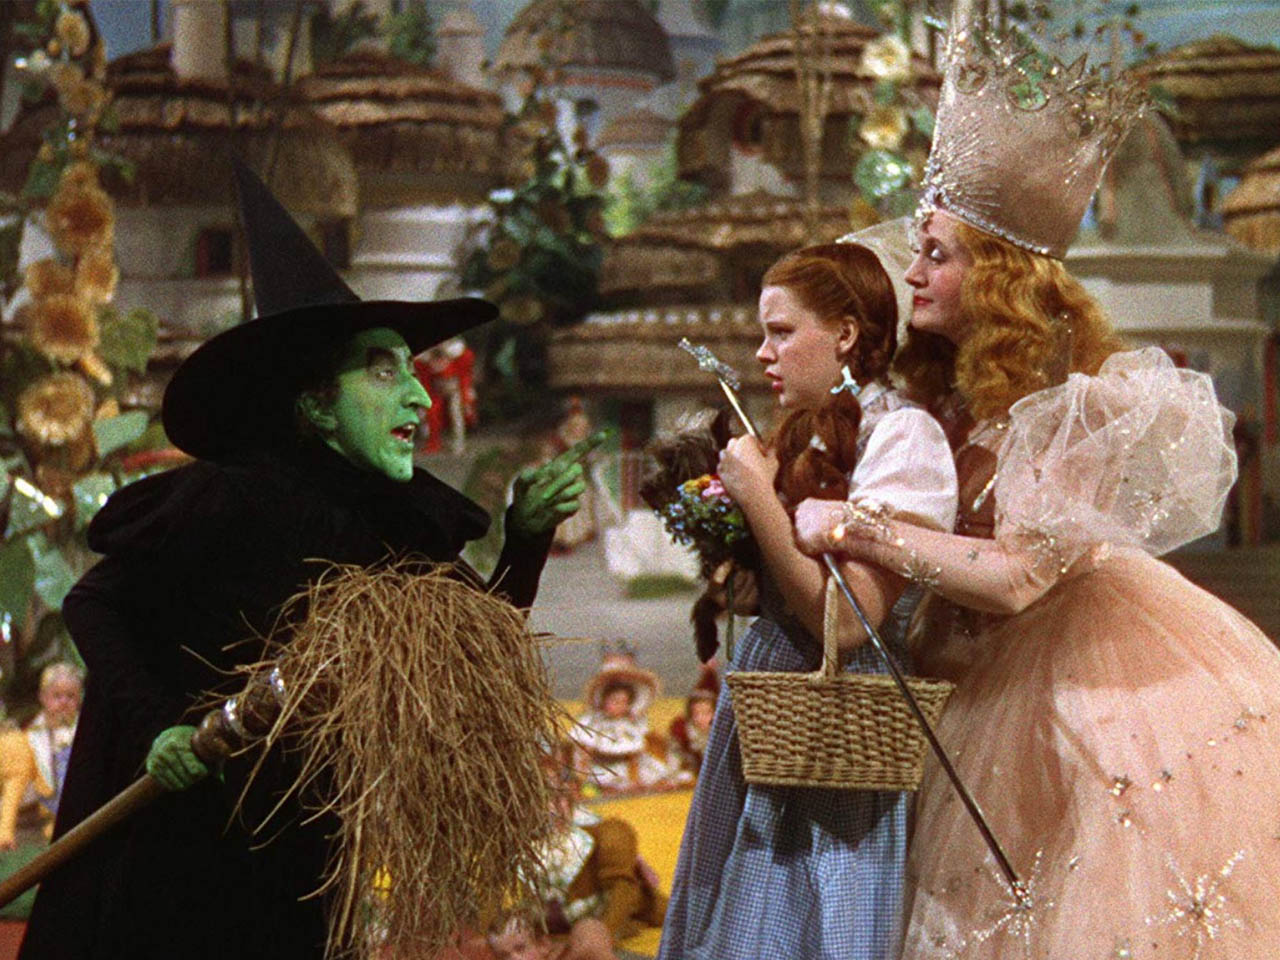 Wizard of Oz remake in the works at New Line Cinema.